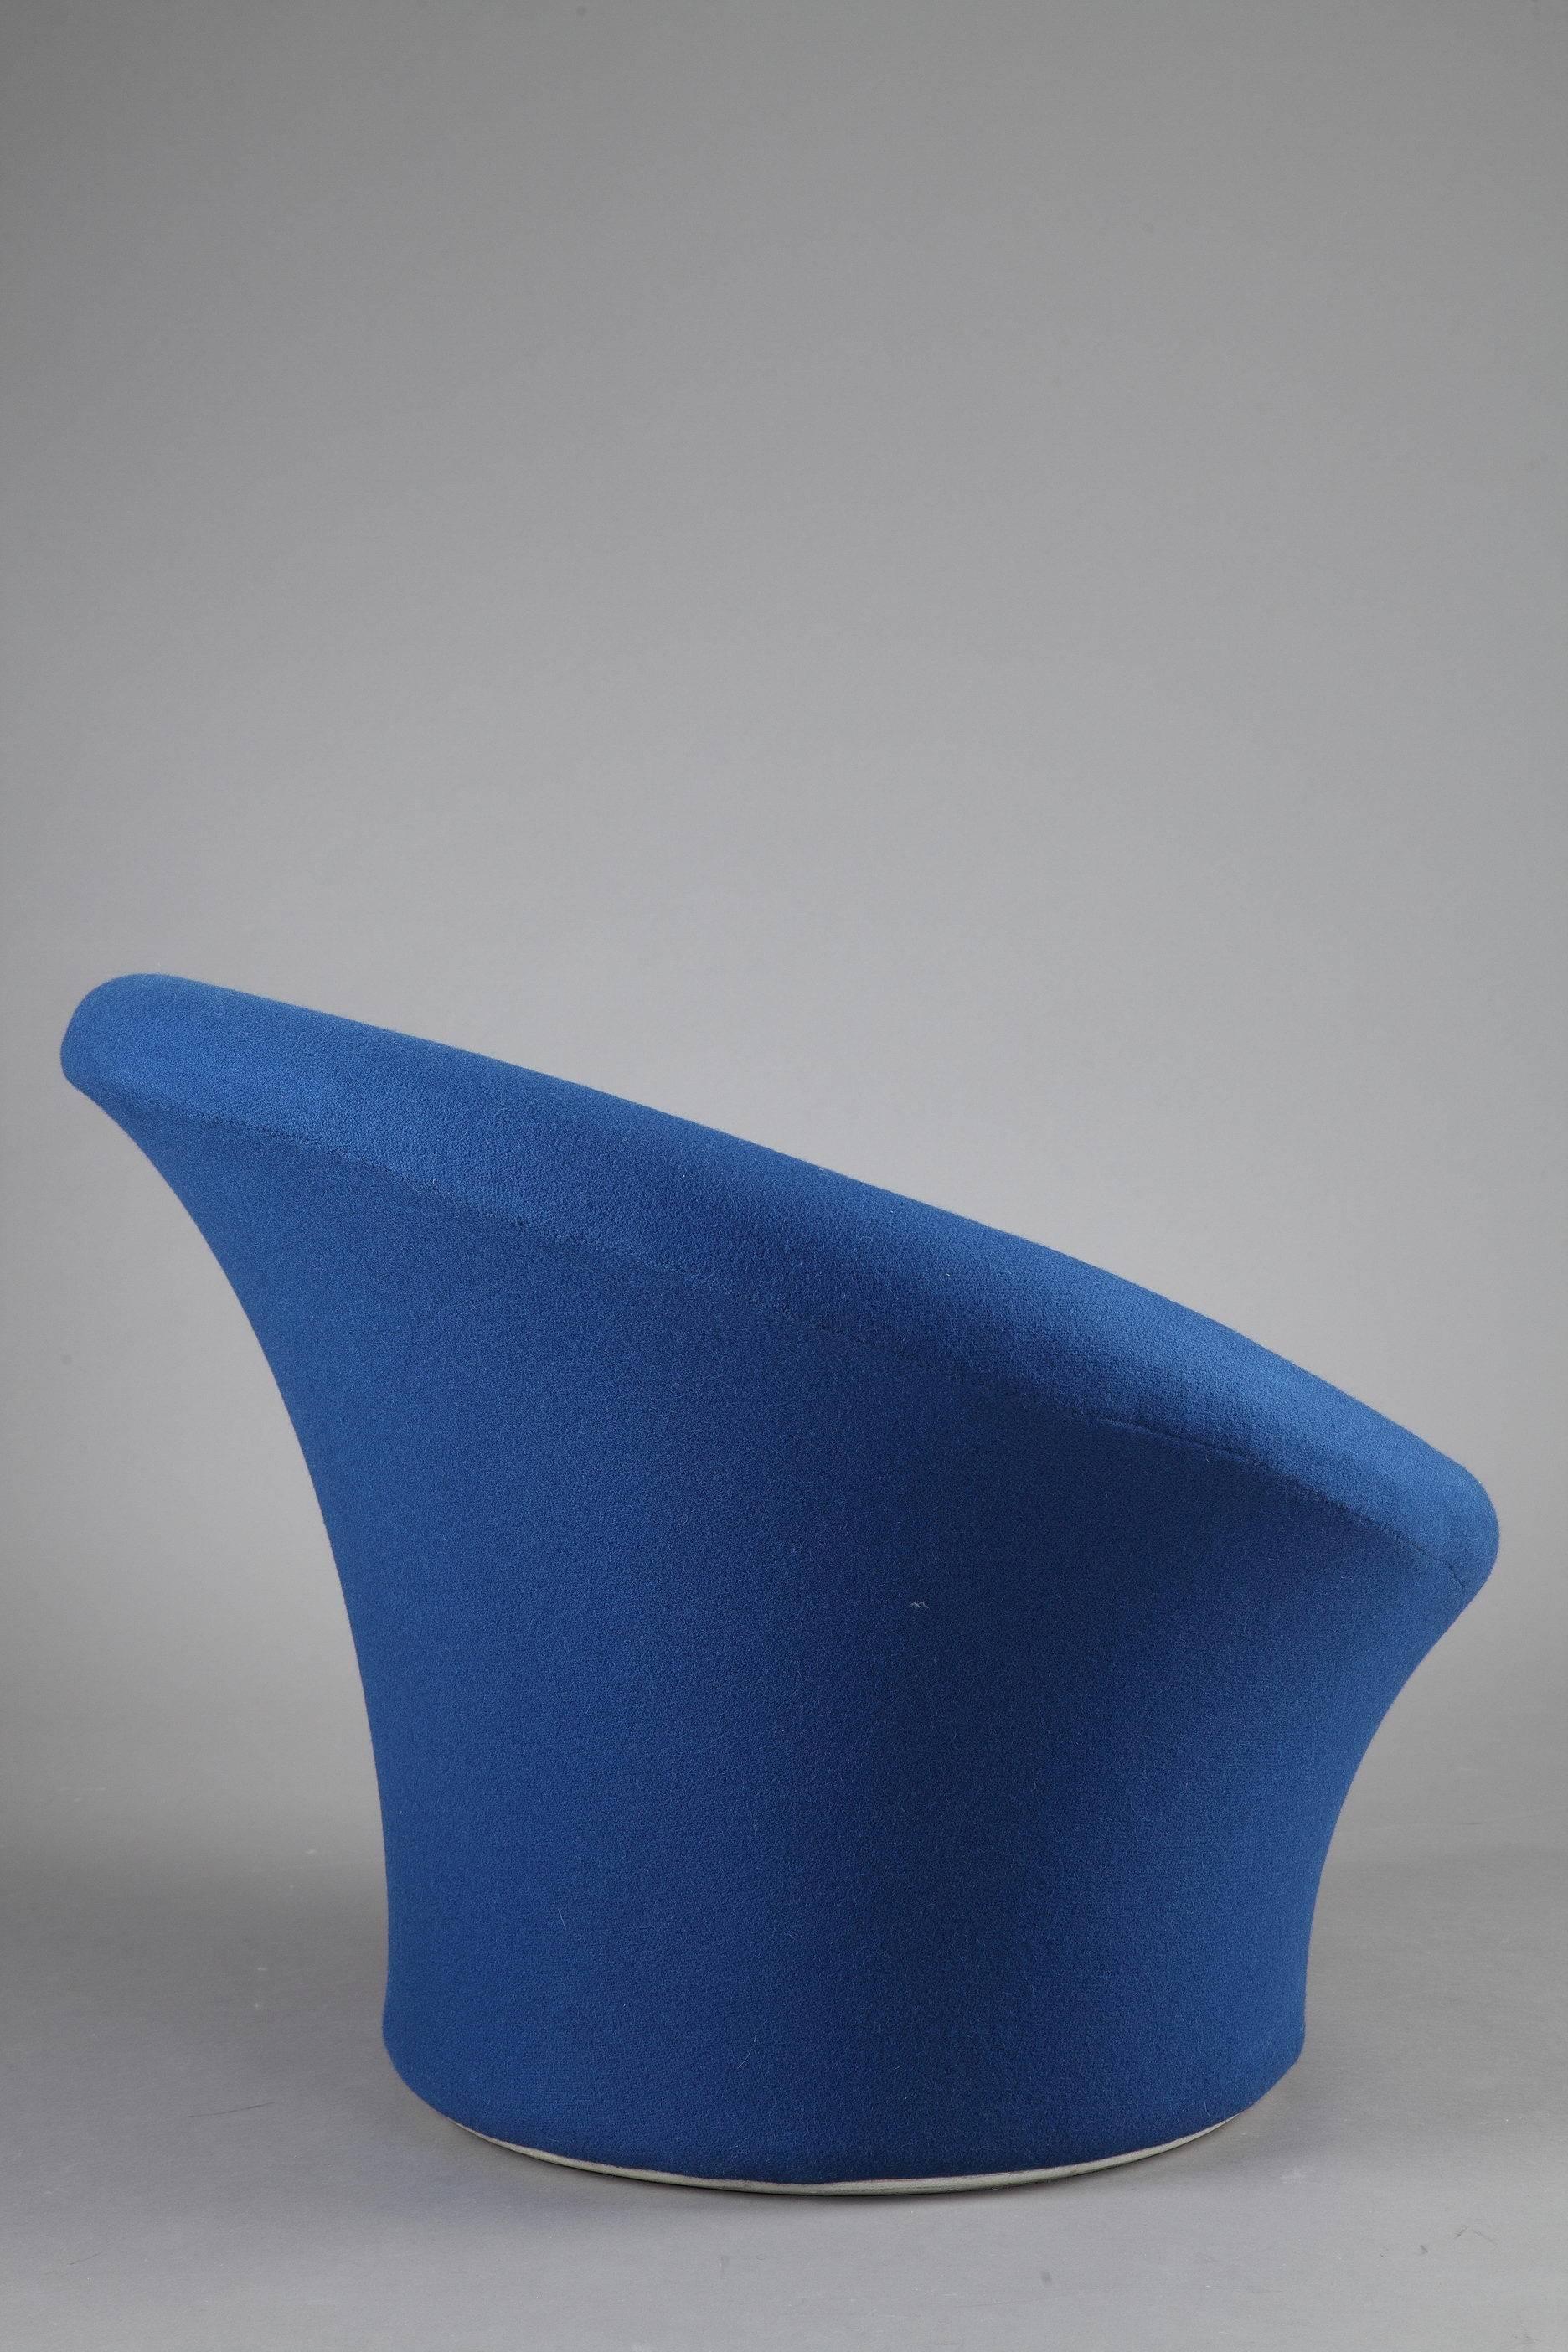 A mushroom set composed of an armchair and an ottoman with a steel tube frame. Designed by Pierre Paulin (Paris, 1927 - Montpellier, 2009). Edited by Artifort. New upolstery with blue fabric.

Measures: Armchair: L: 80 cm, P: 80 cm, H: 65